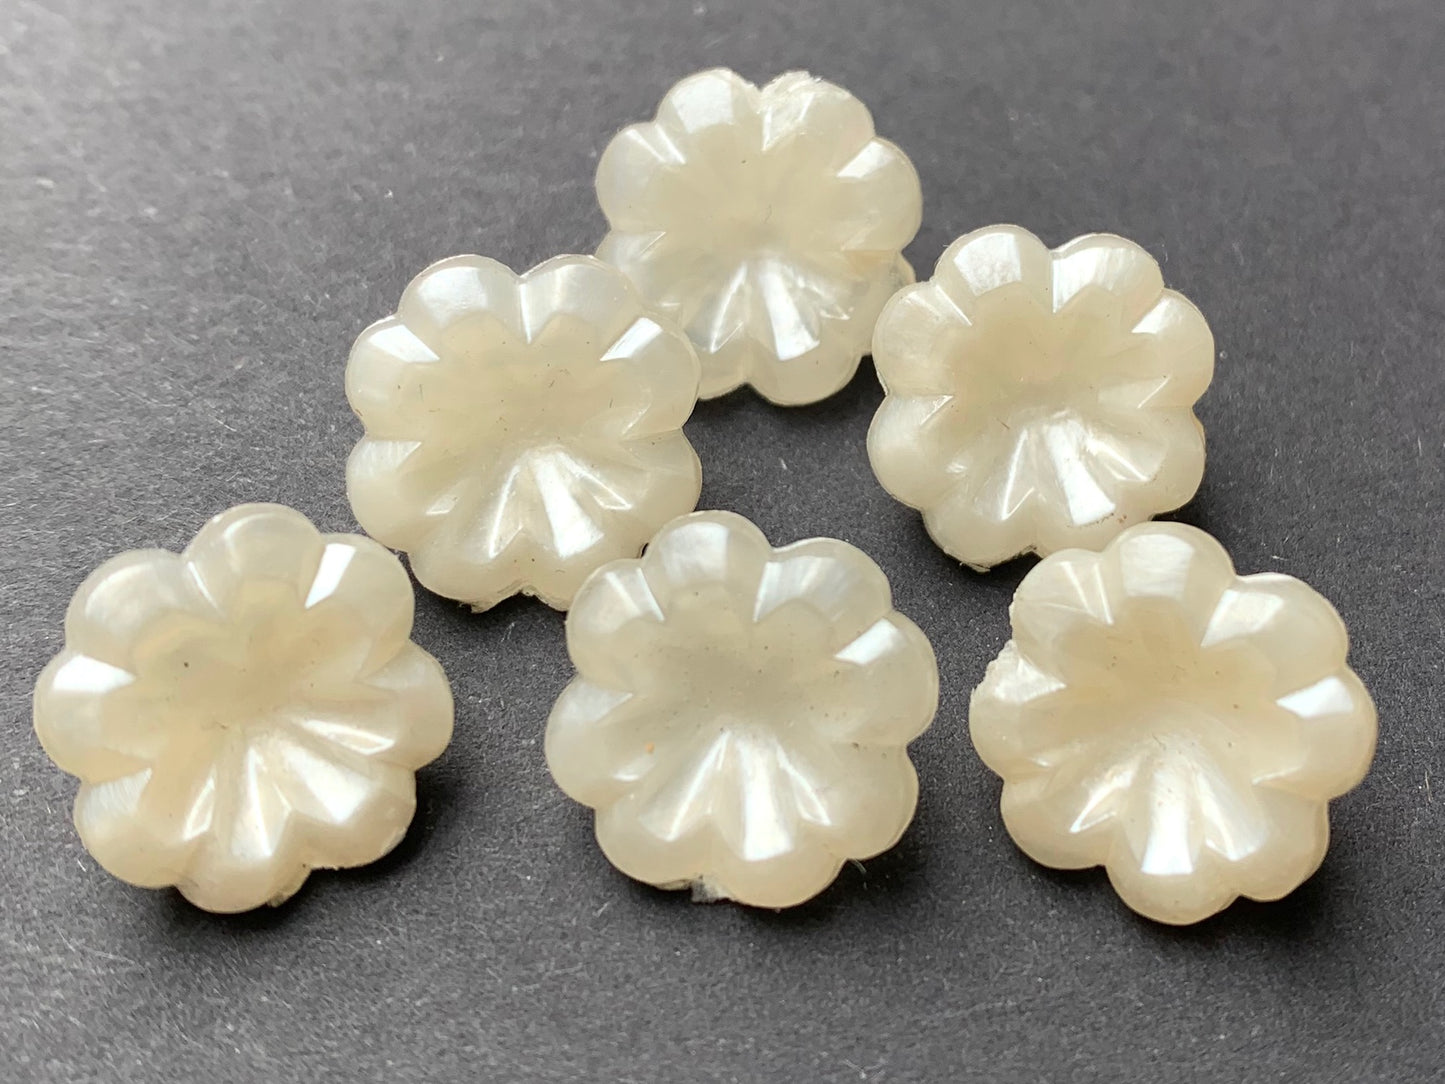 6 Creamy White Vintage Flower Buttons -1.2cm wide